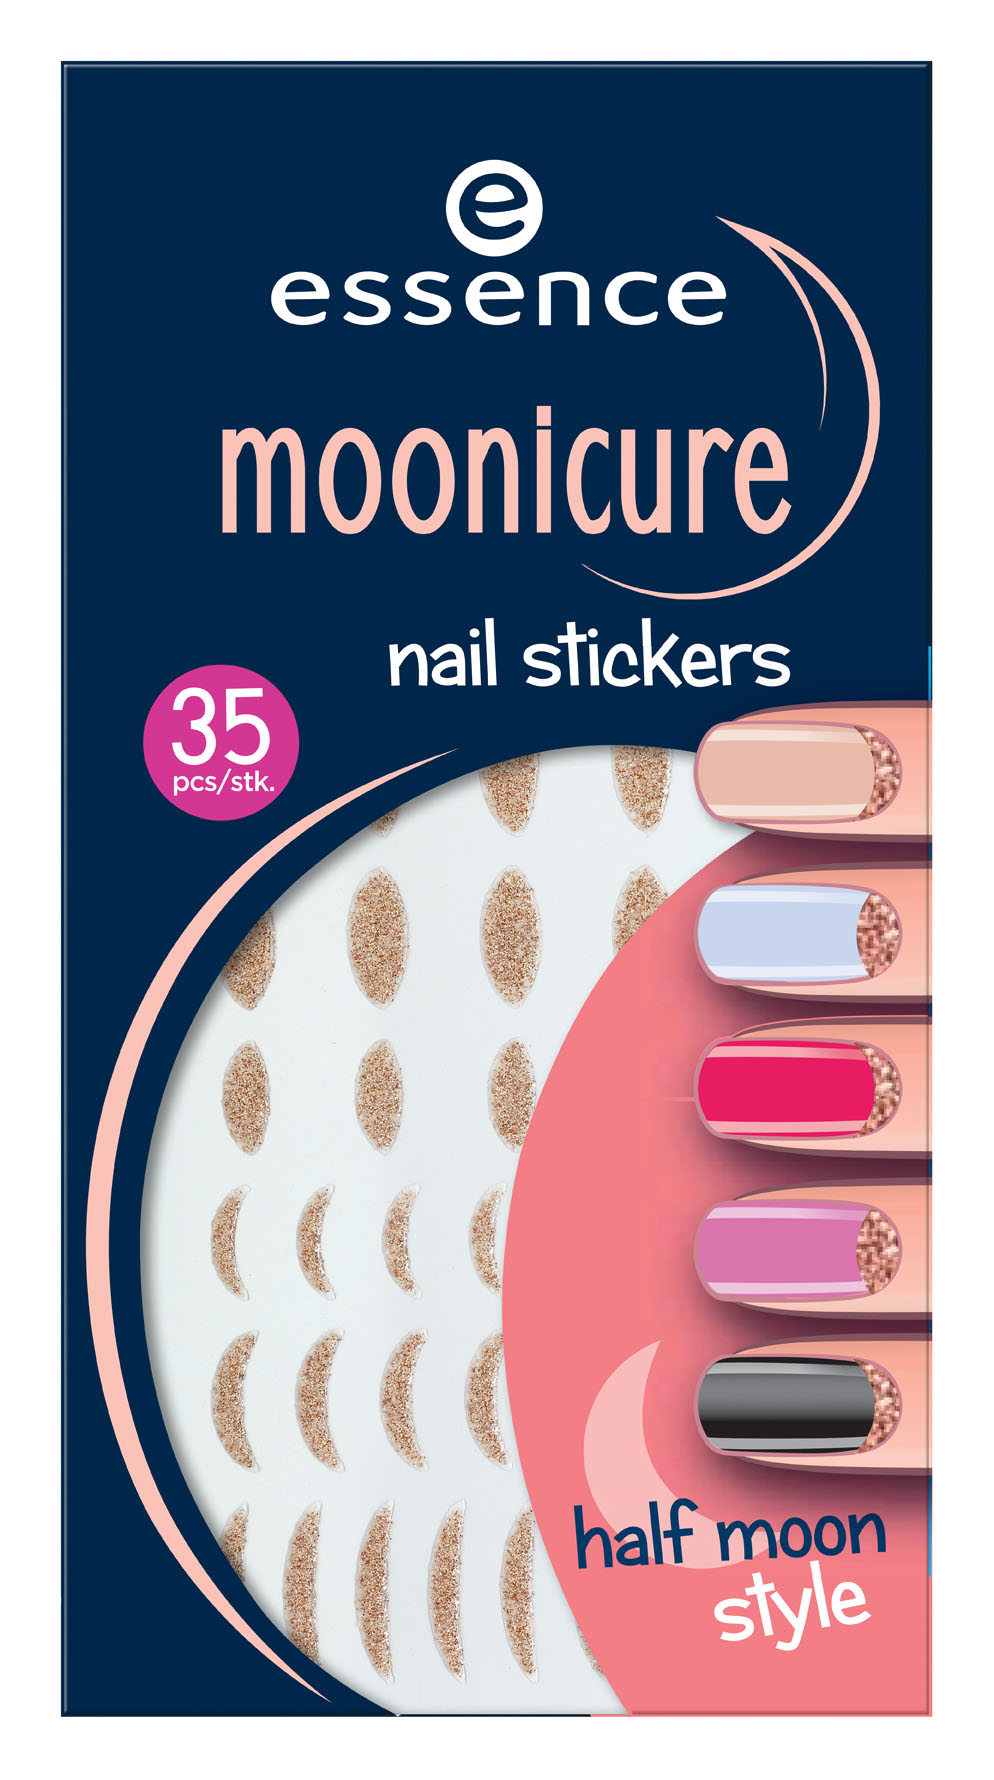 ess. moonicure nail stickers